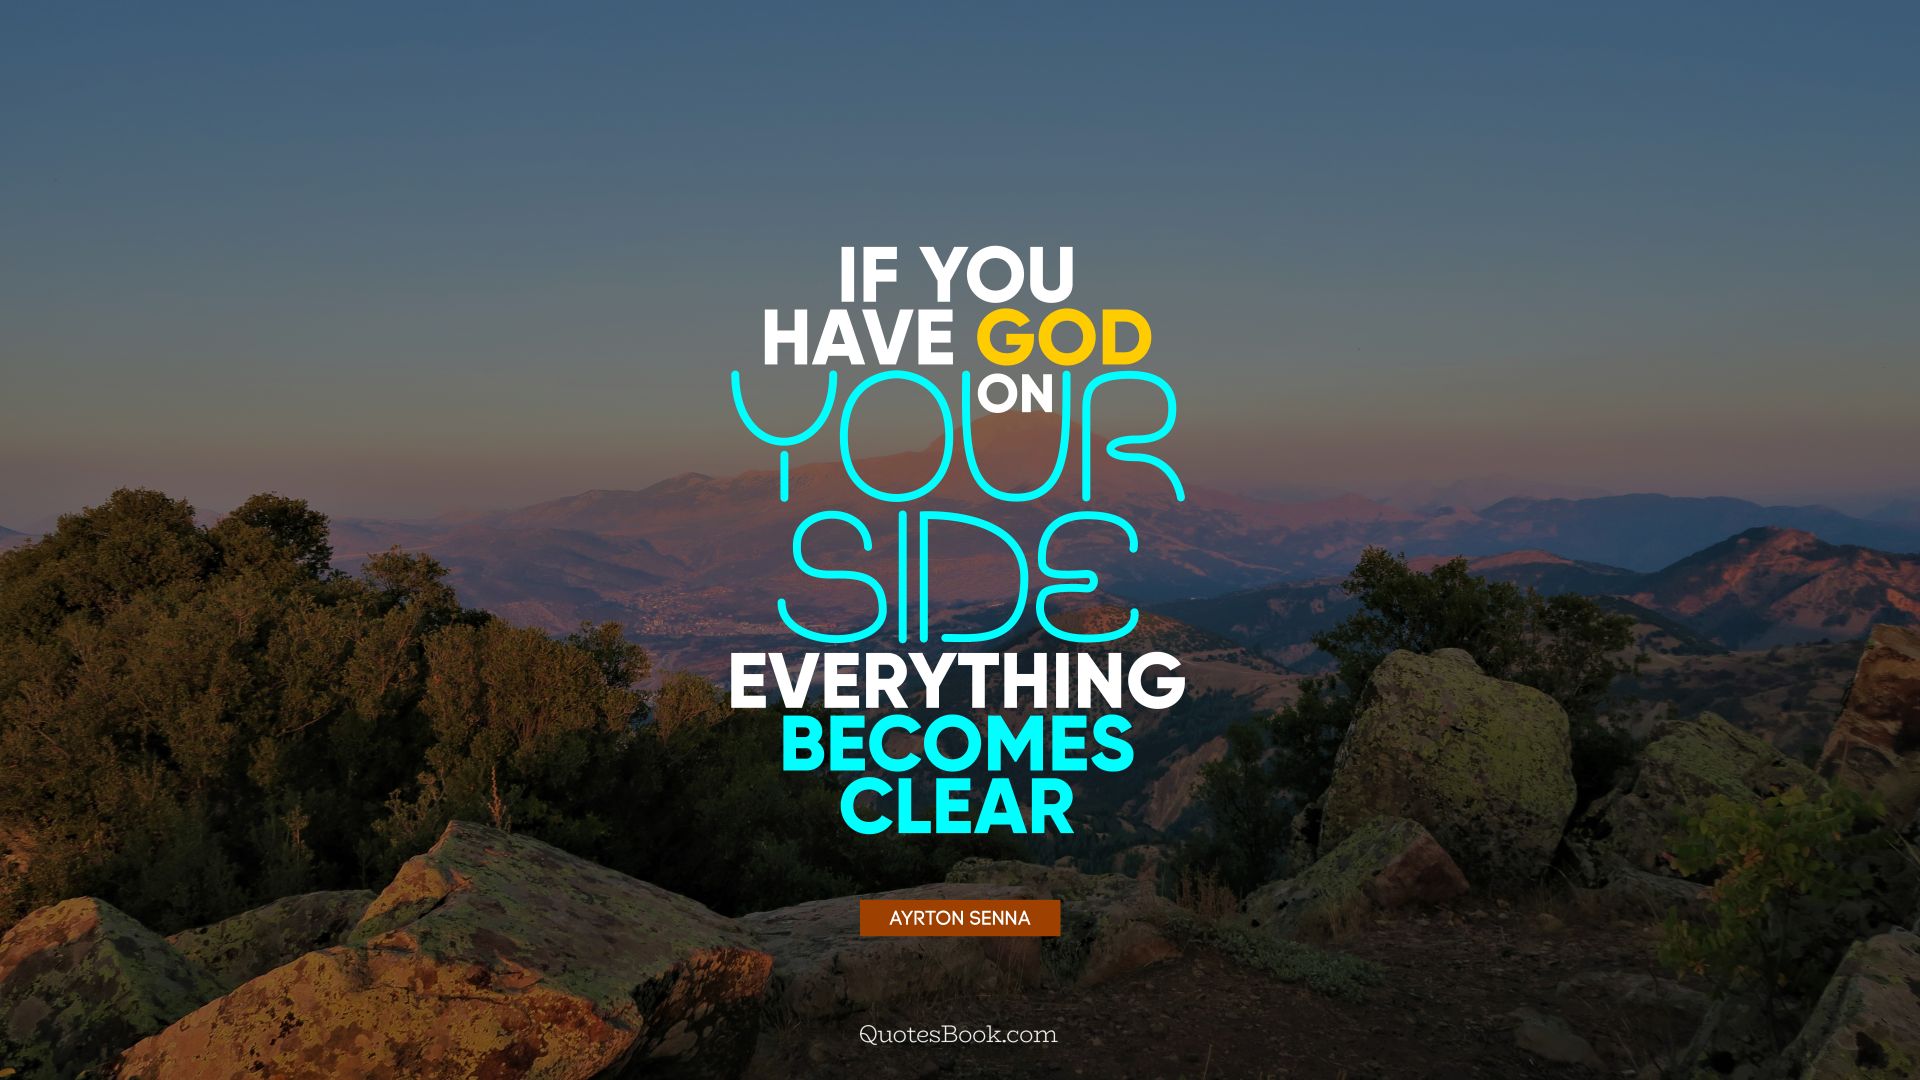 If you have God on your side, everything becomes clear. - Quote by Ayrton Senna